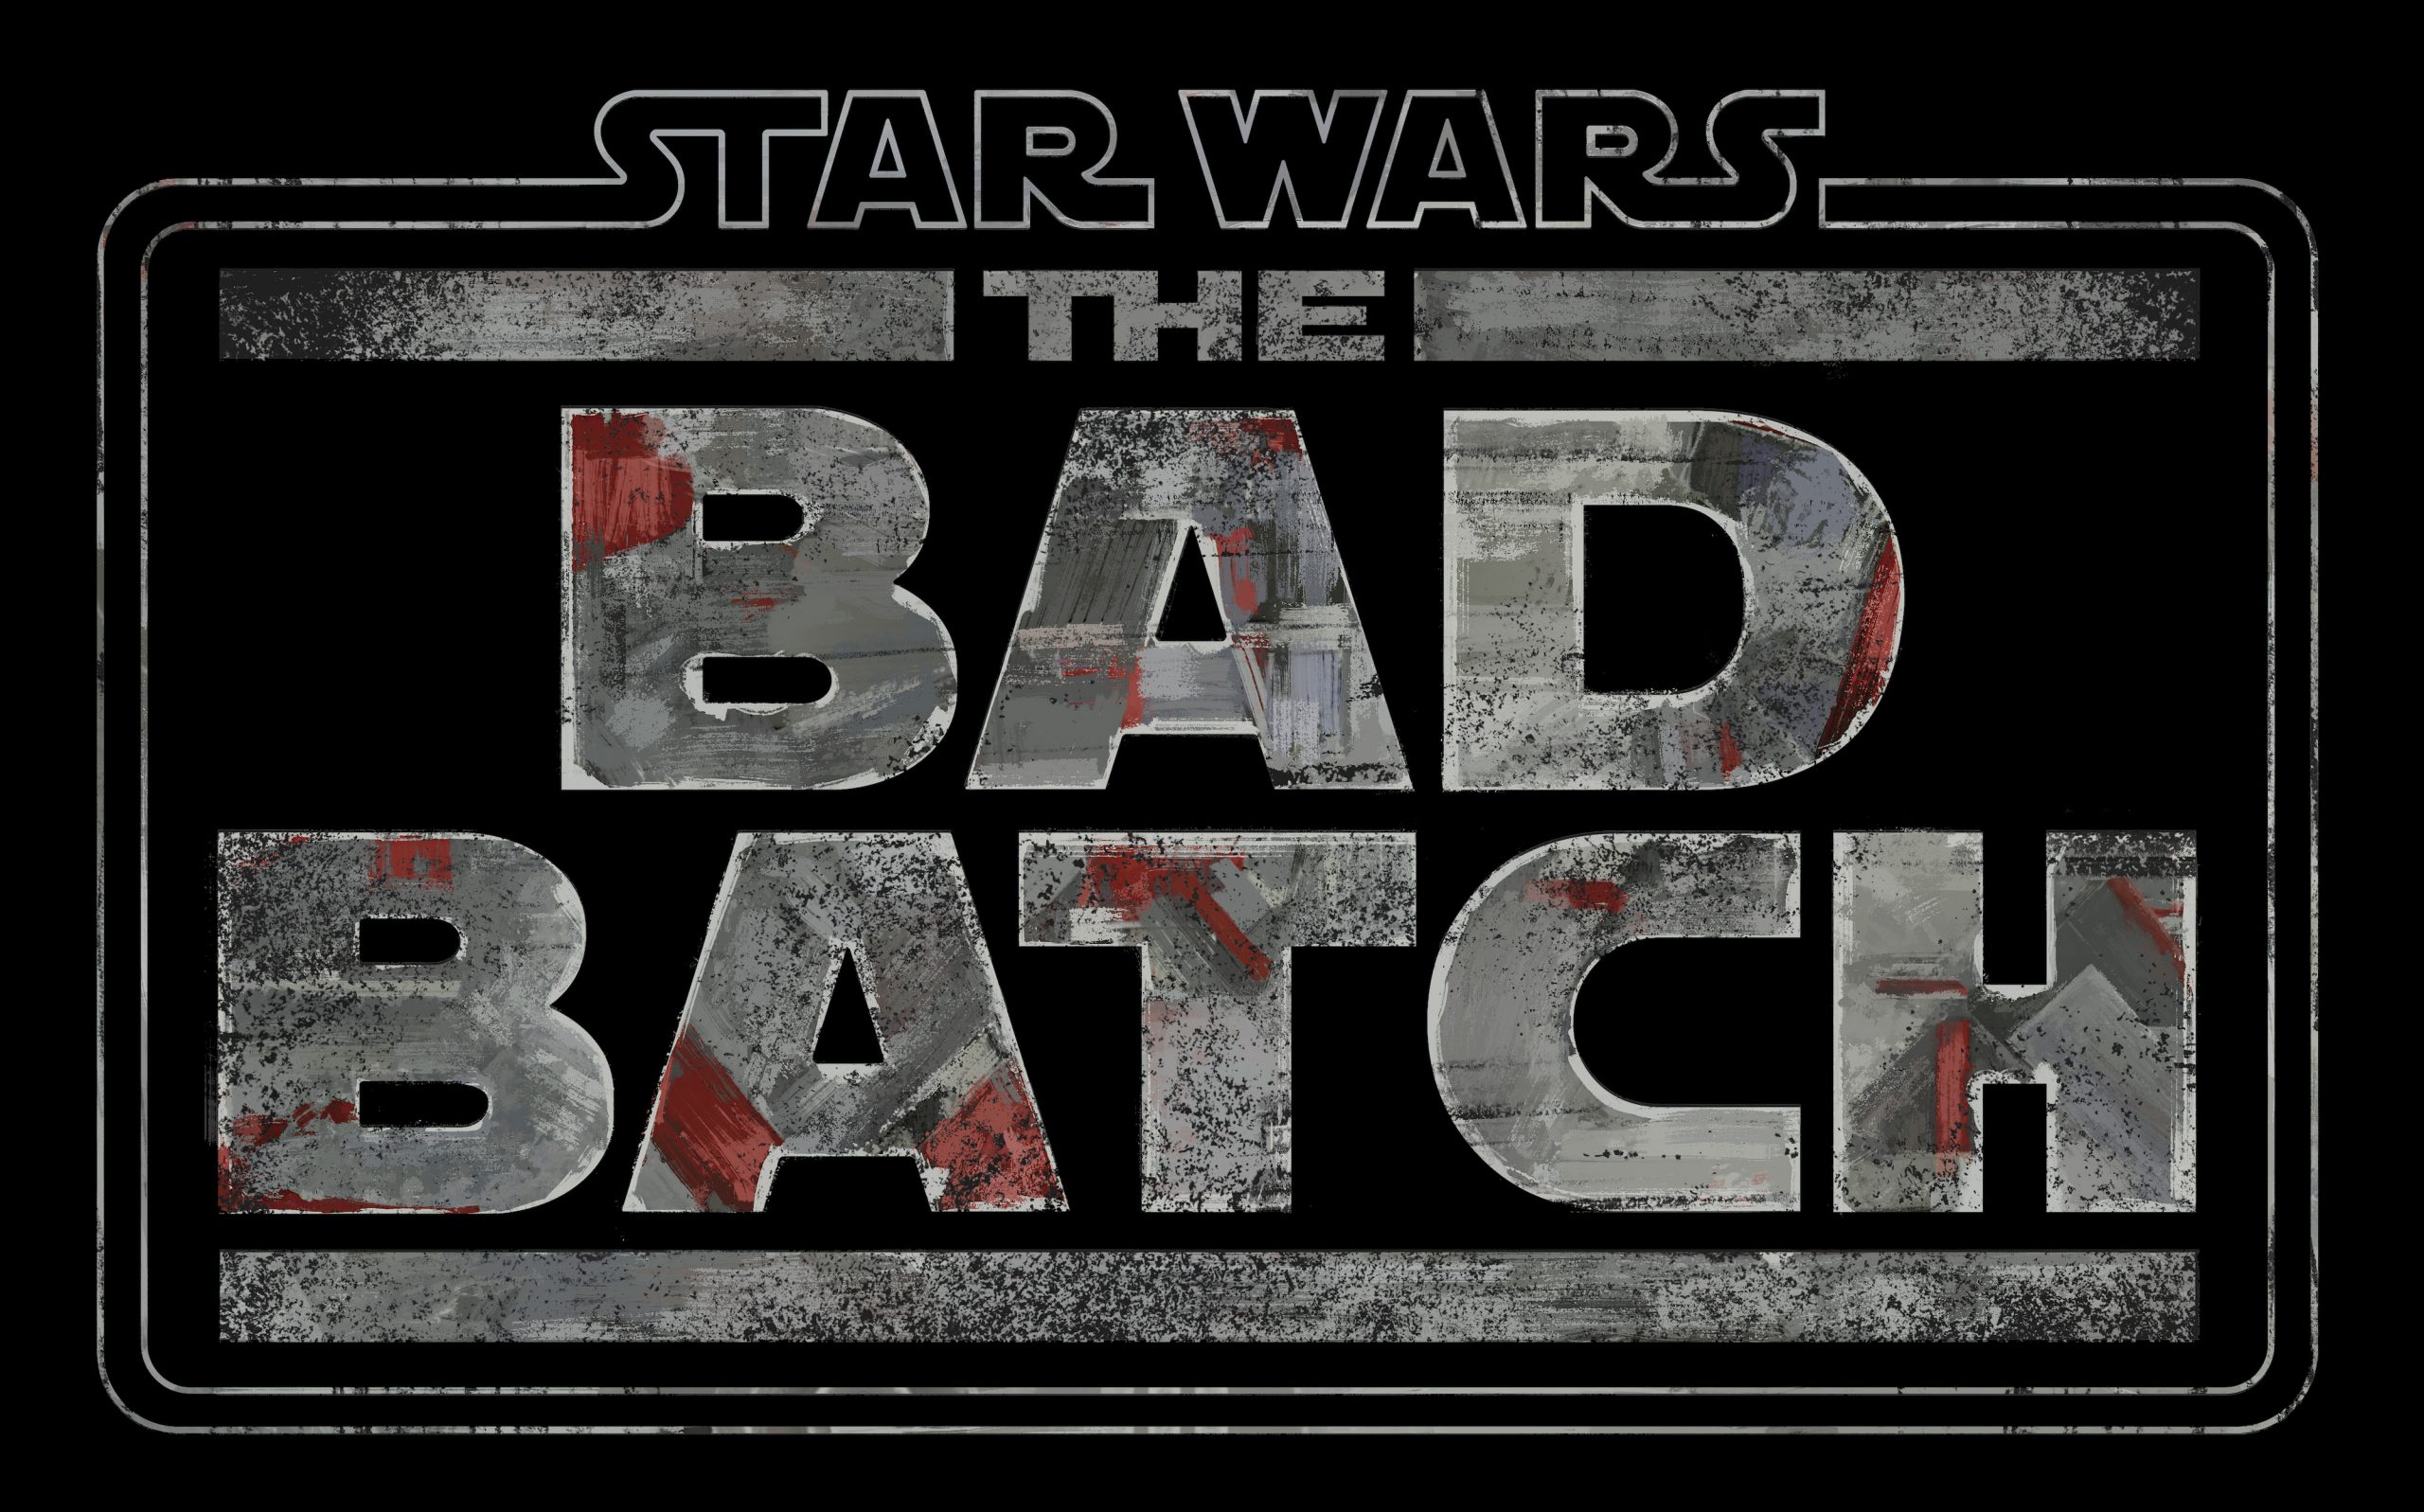 Bo-Katan To Appear In New Star Wars Animated Series | Barside Buzz